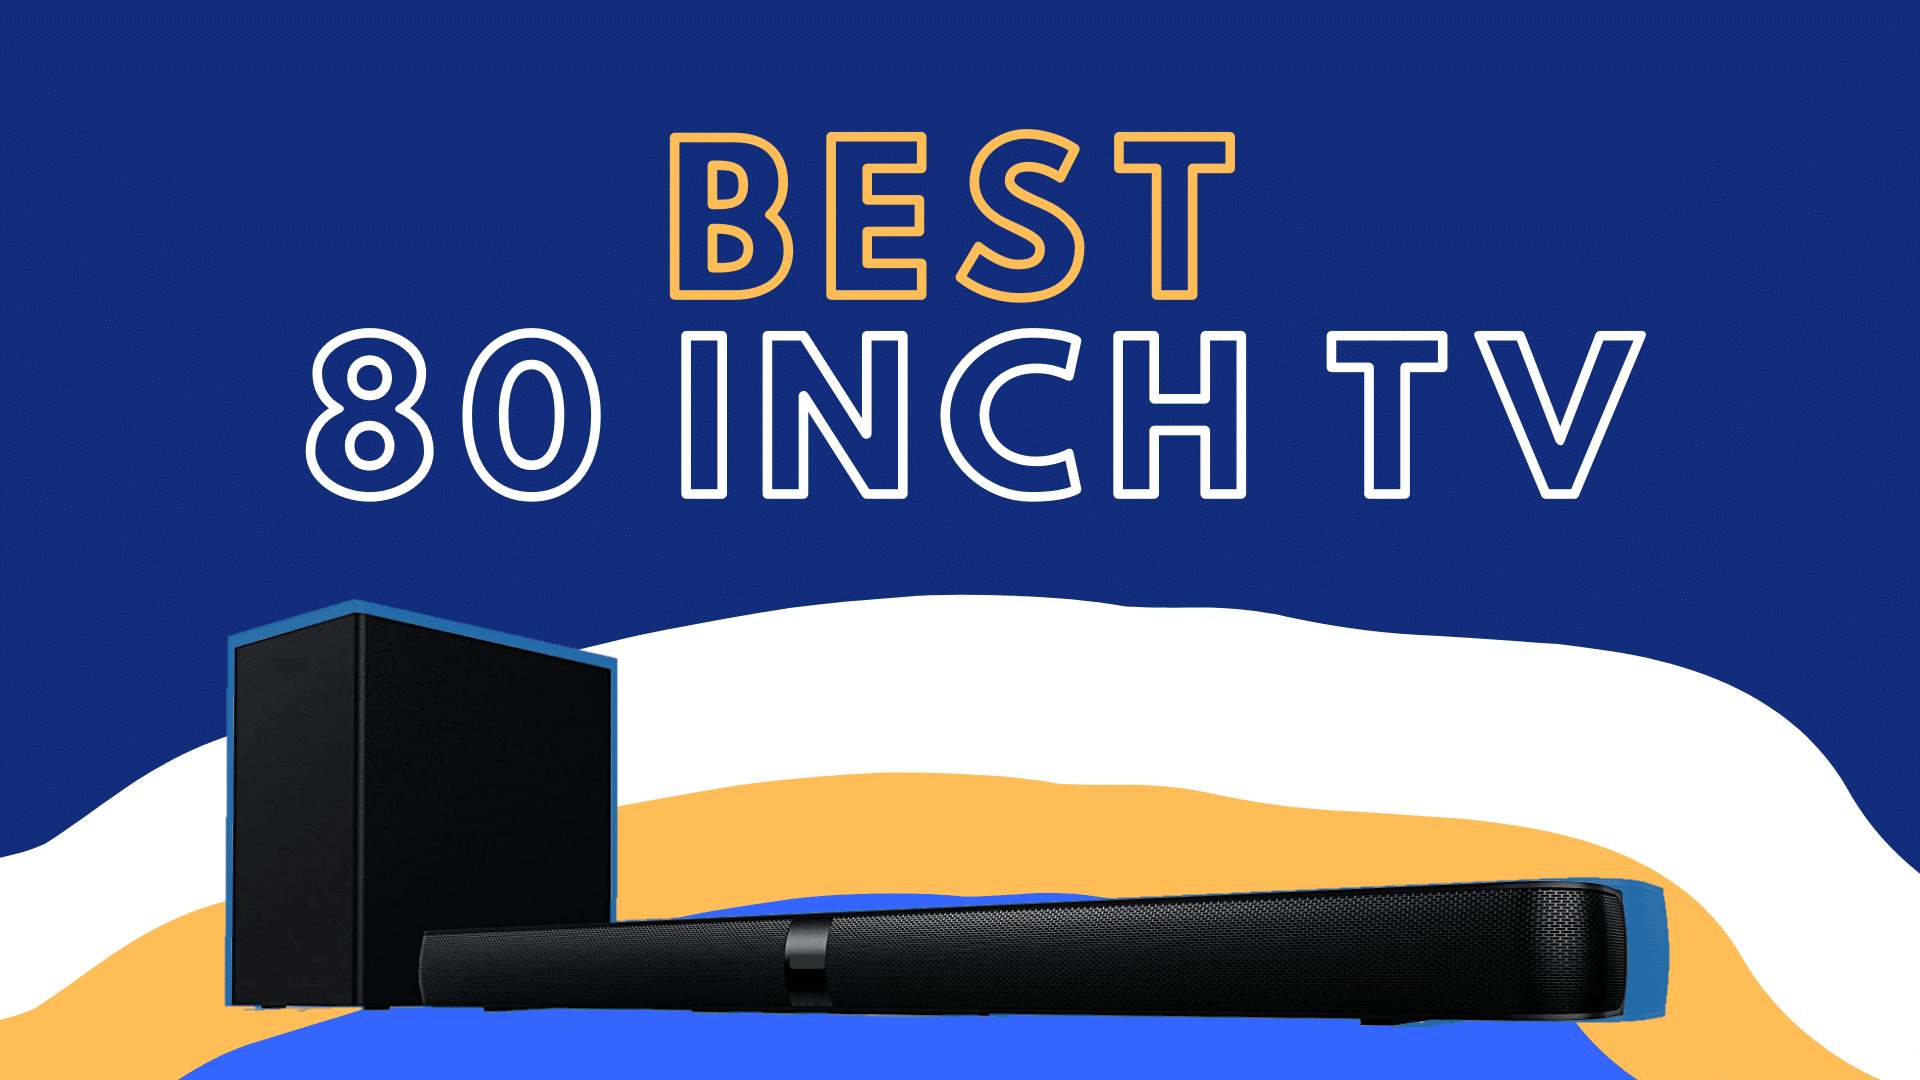 Best 80 Inch Tvs For The Money With 4k Resolution 2021